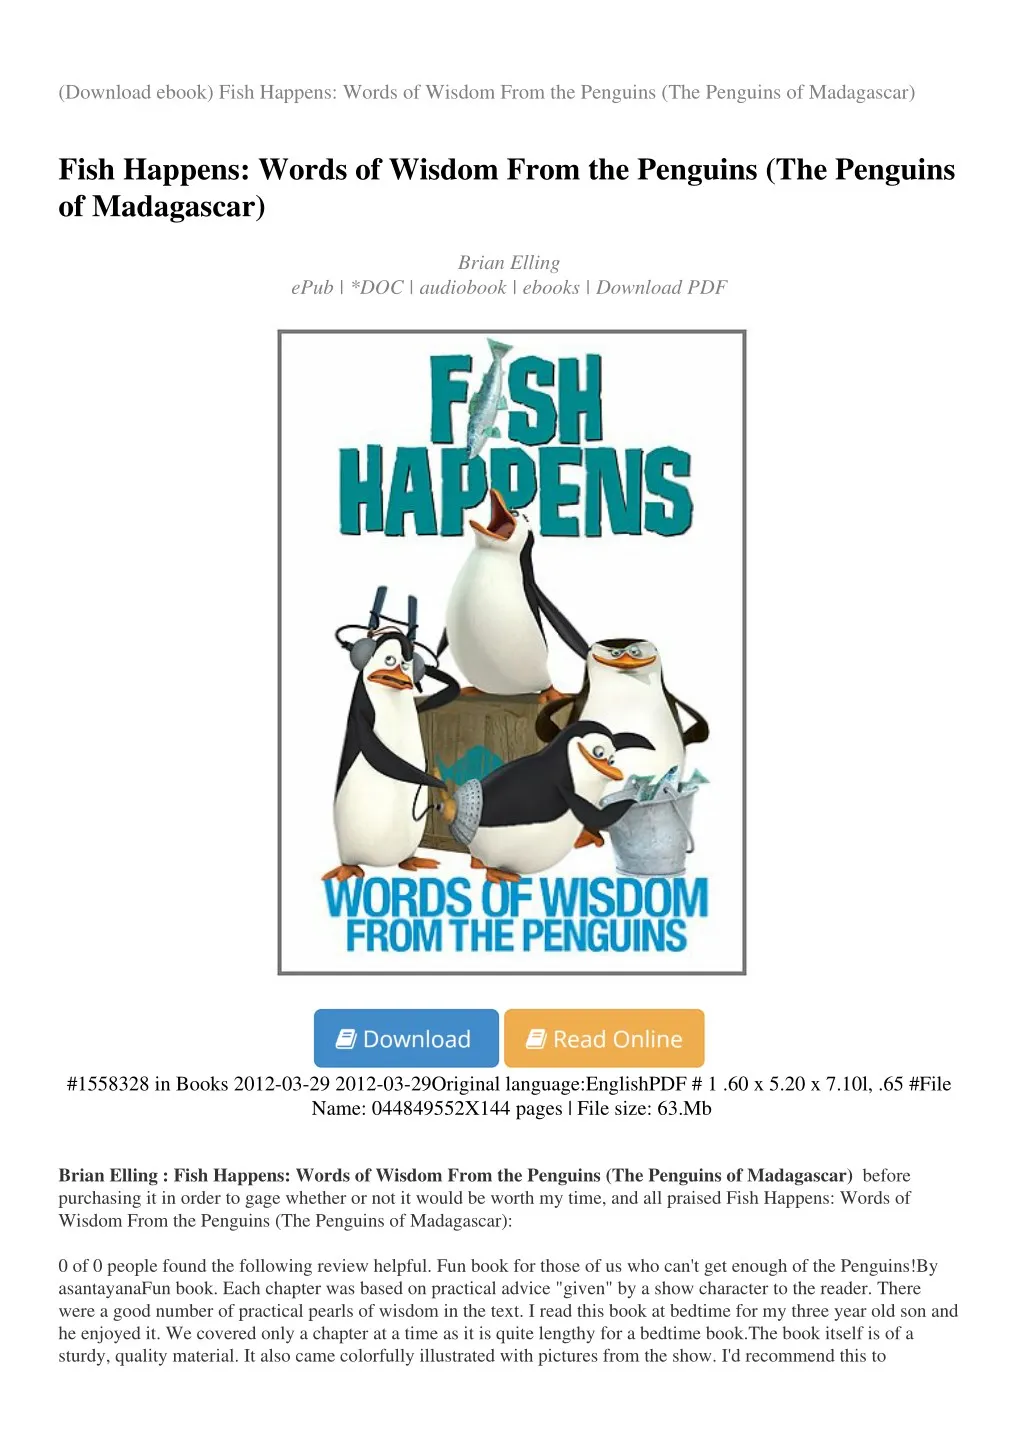 download ebook fish happens words of wisdom from